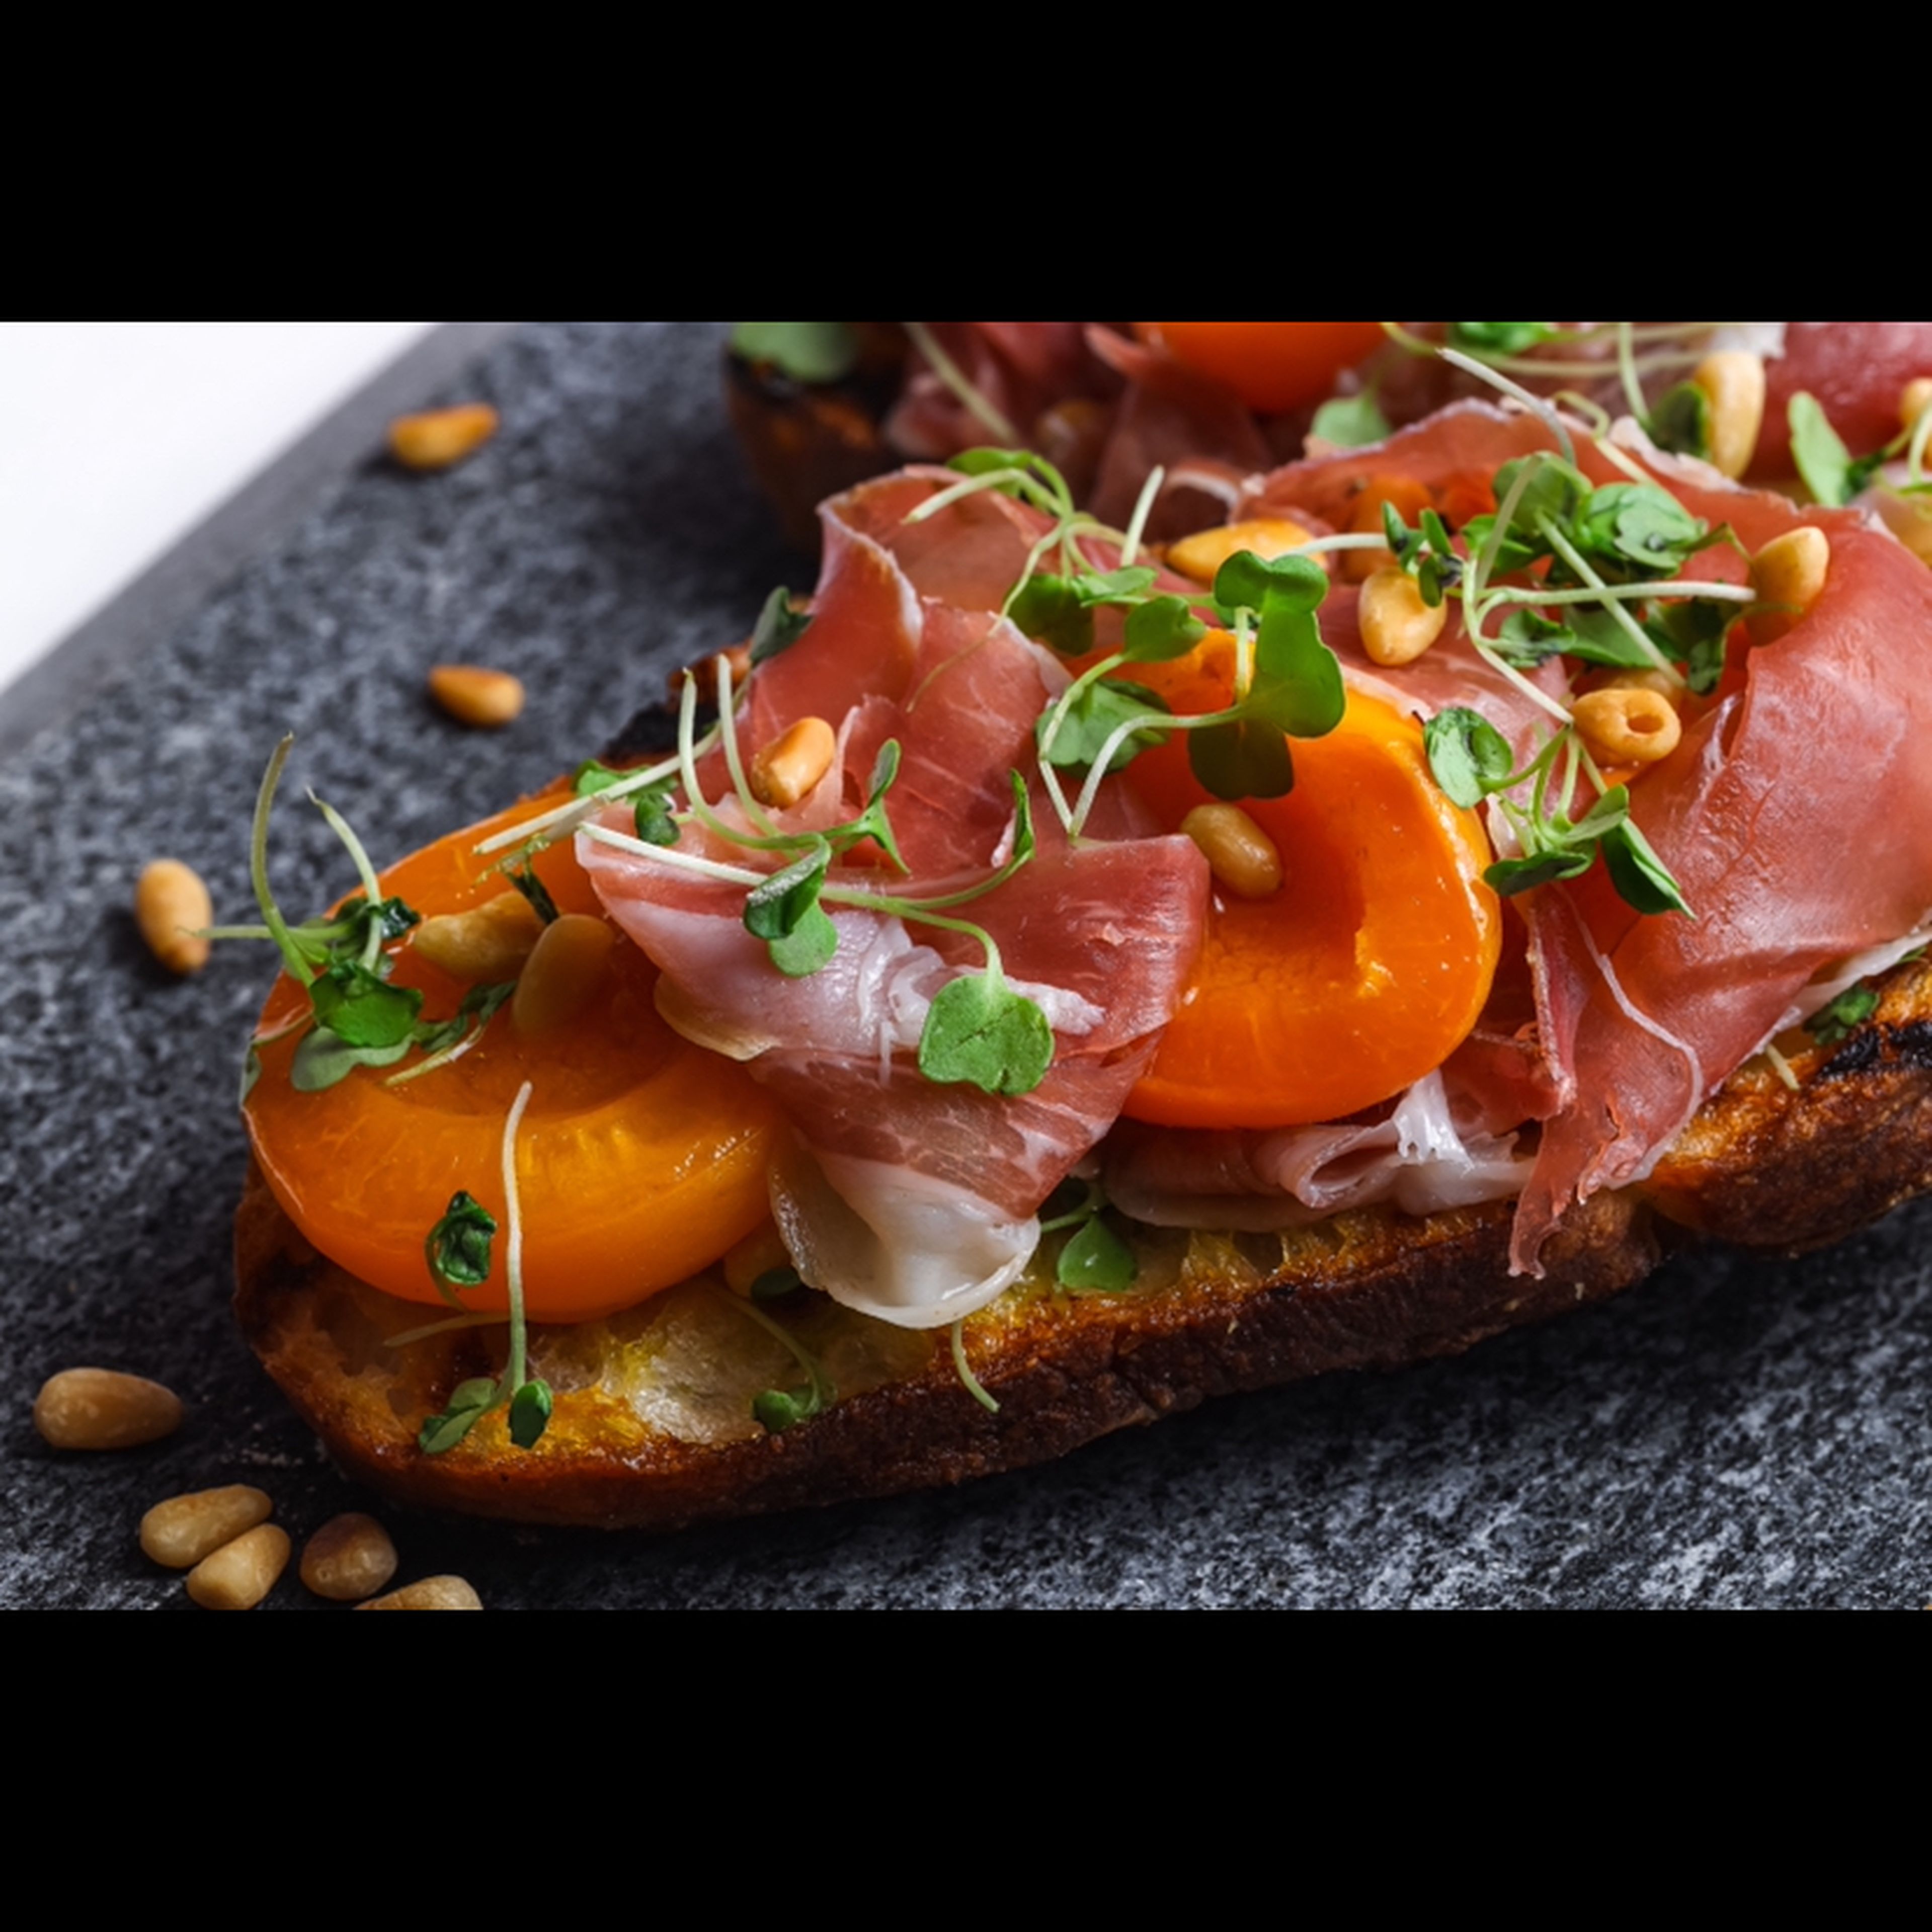 Layer prosciutto and cooked apricots onto grilled bread. Sprinkle on toasted pine nuts and micro arugula. Finish with a drizzle of olive oil.